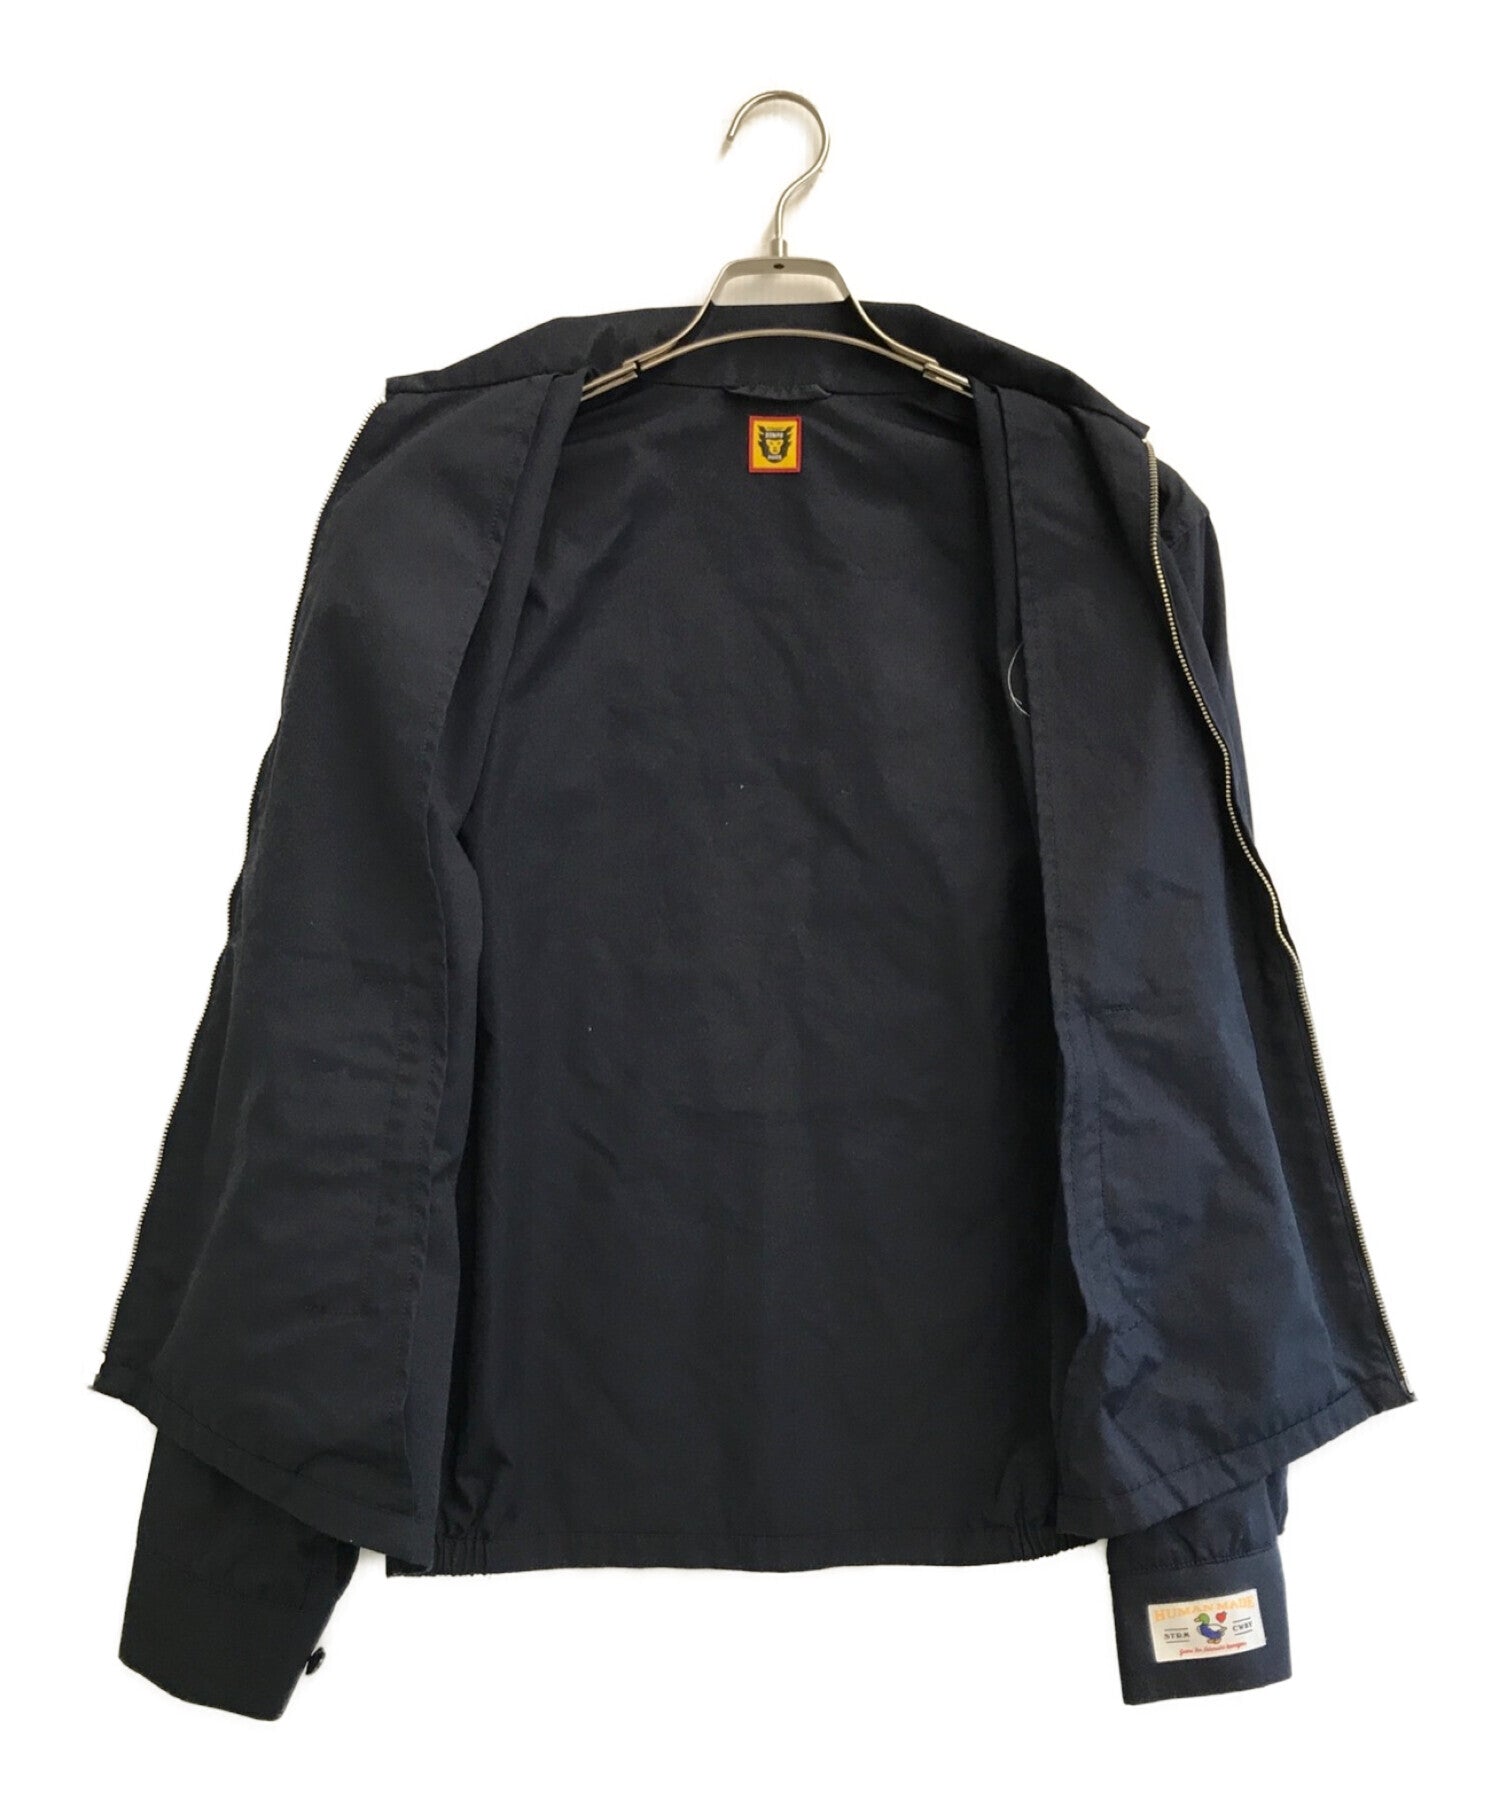 Pre-owned] HUMAN MADE DRIZZLER JACKET | Archive Factory